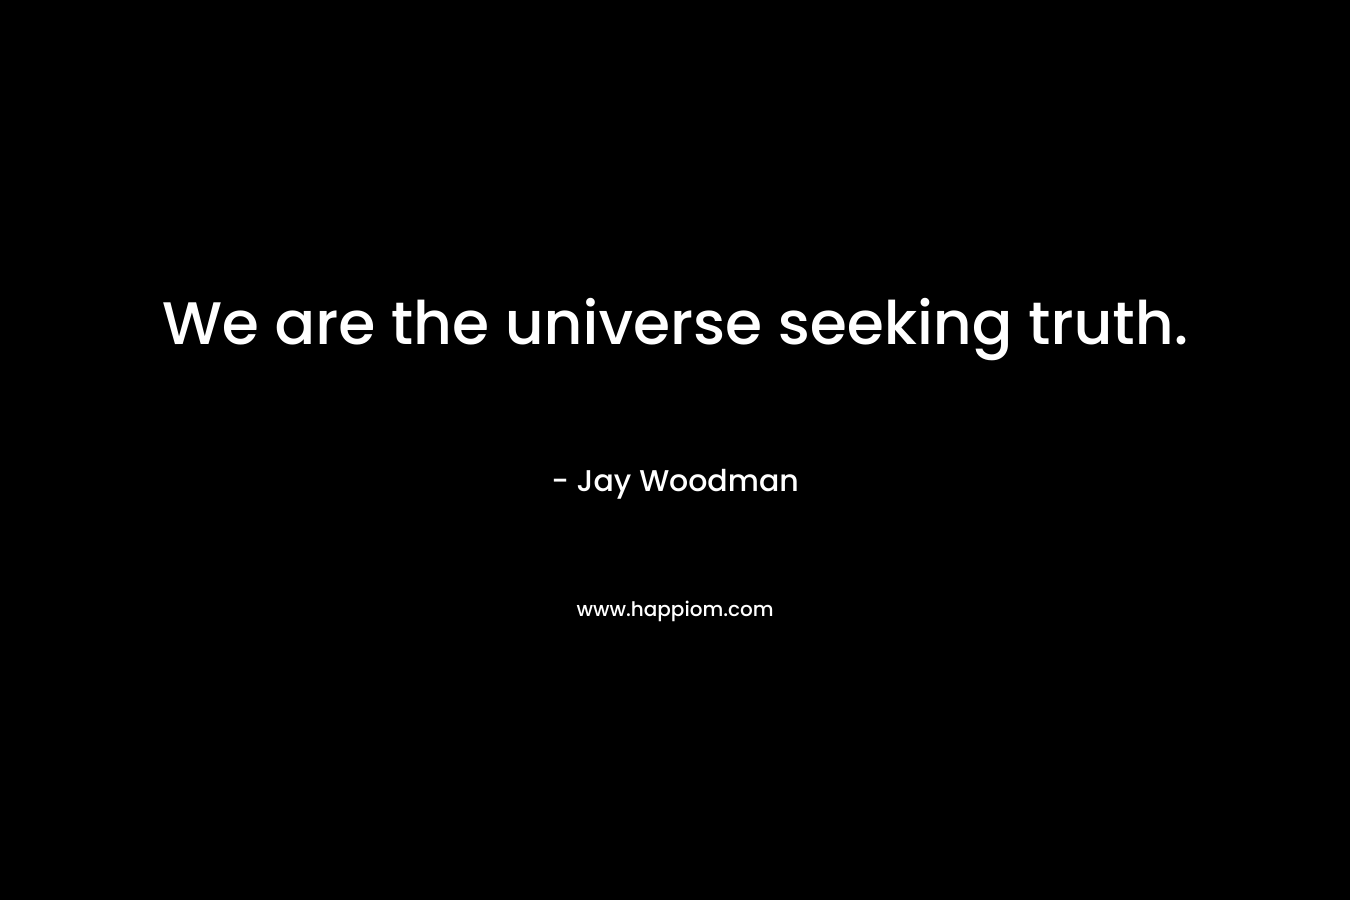 We are the universe seeking truth.